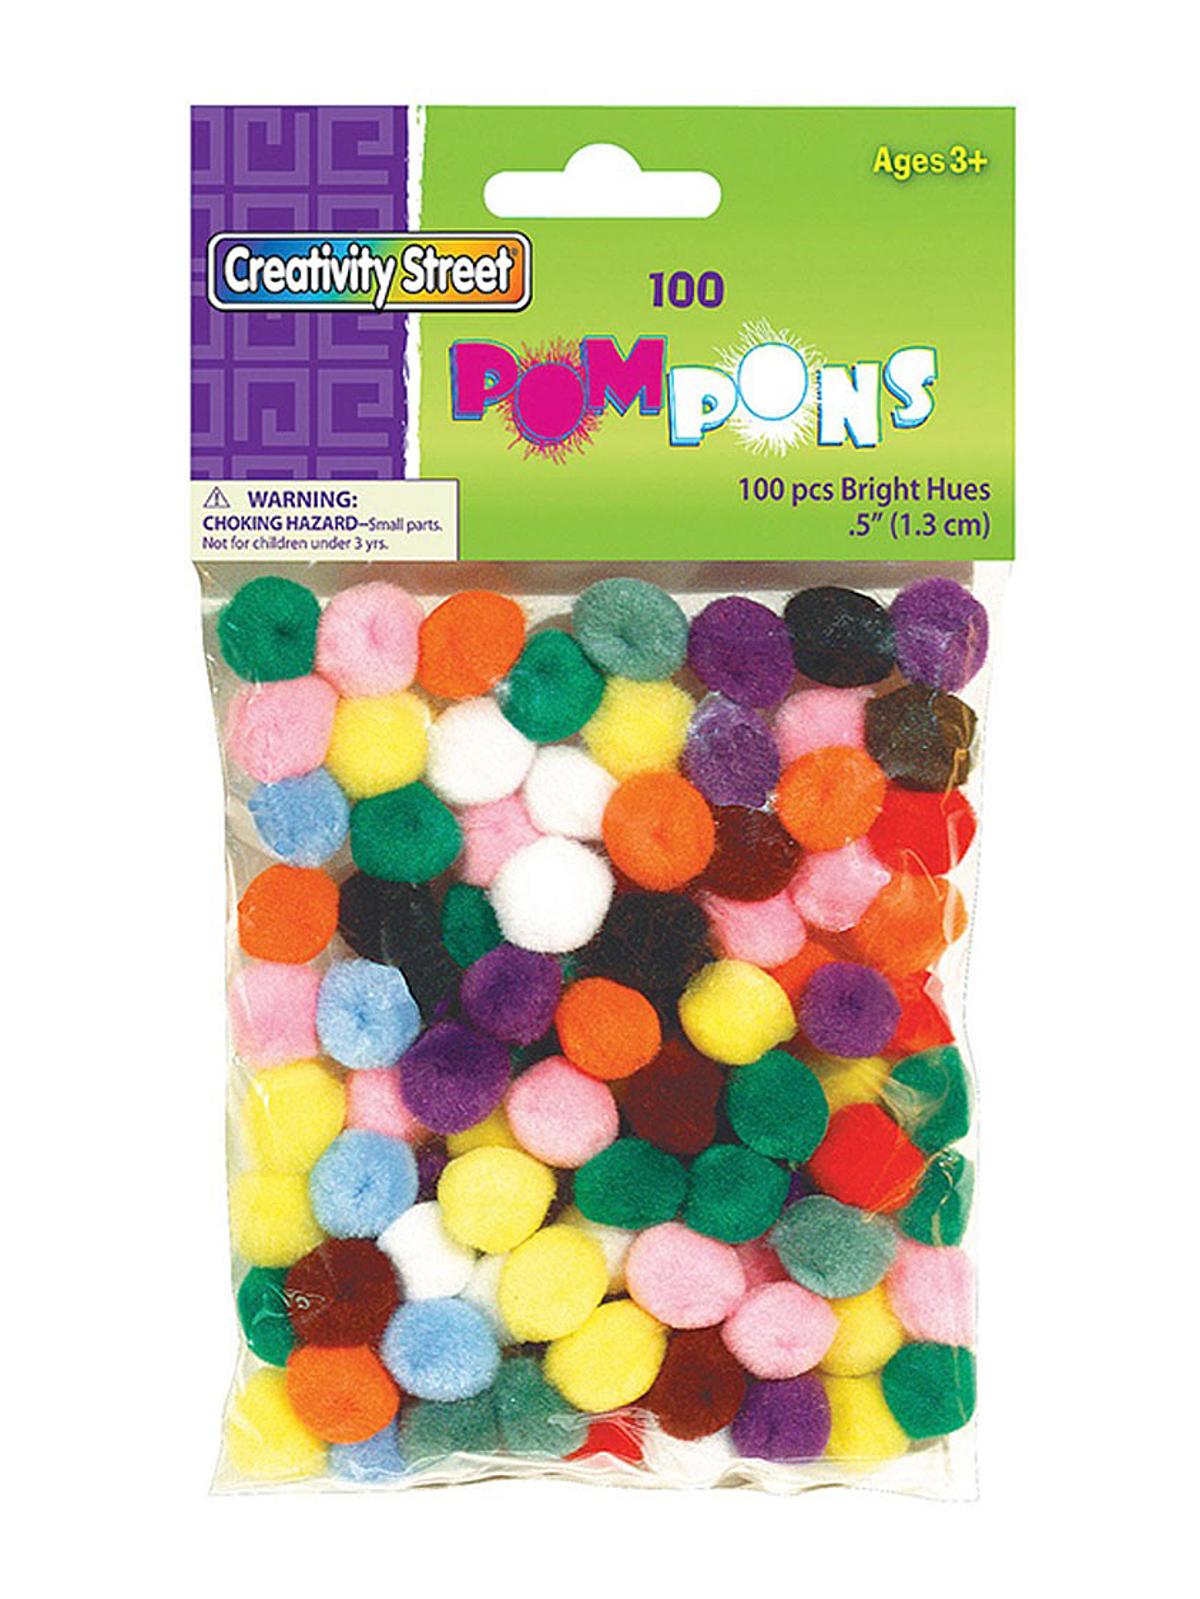 Pom-Poms Bright Hues 100 Pieces 1 2 In.